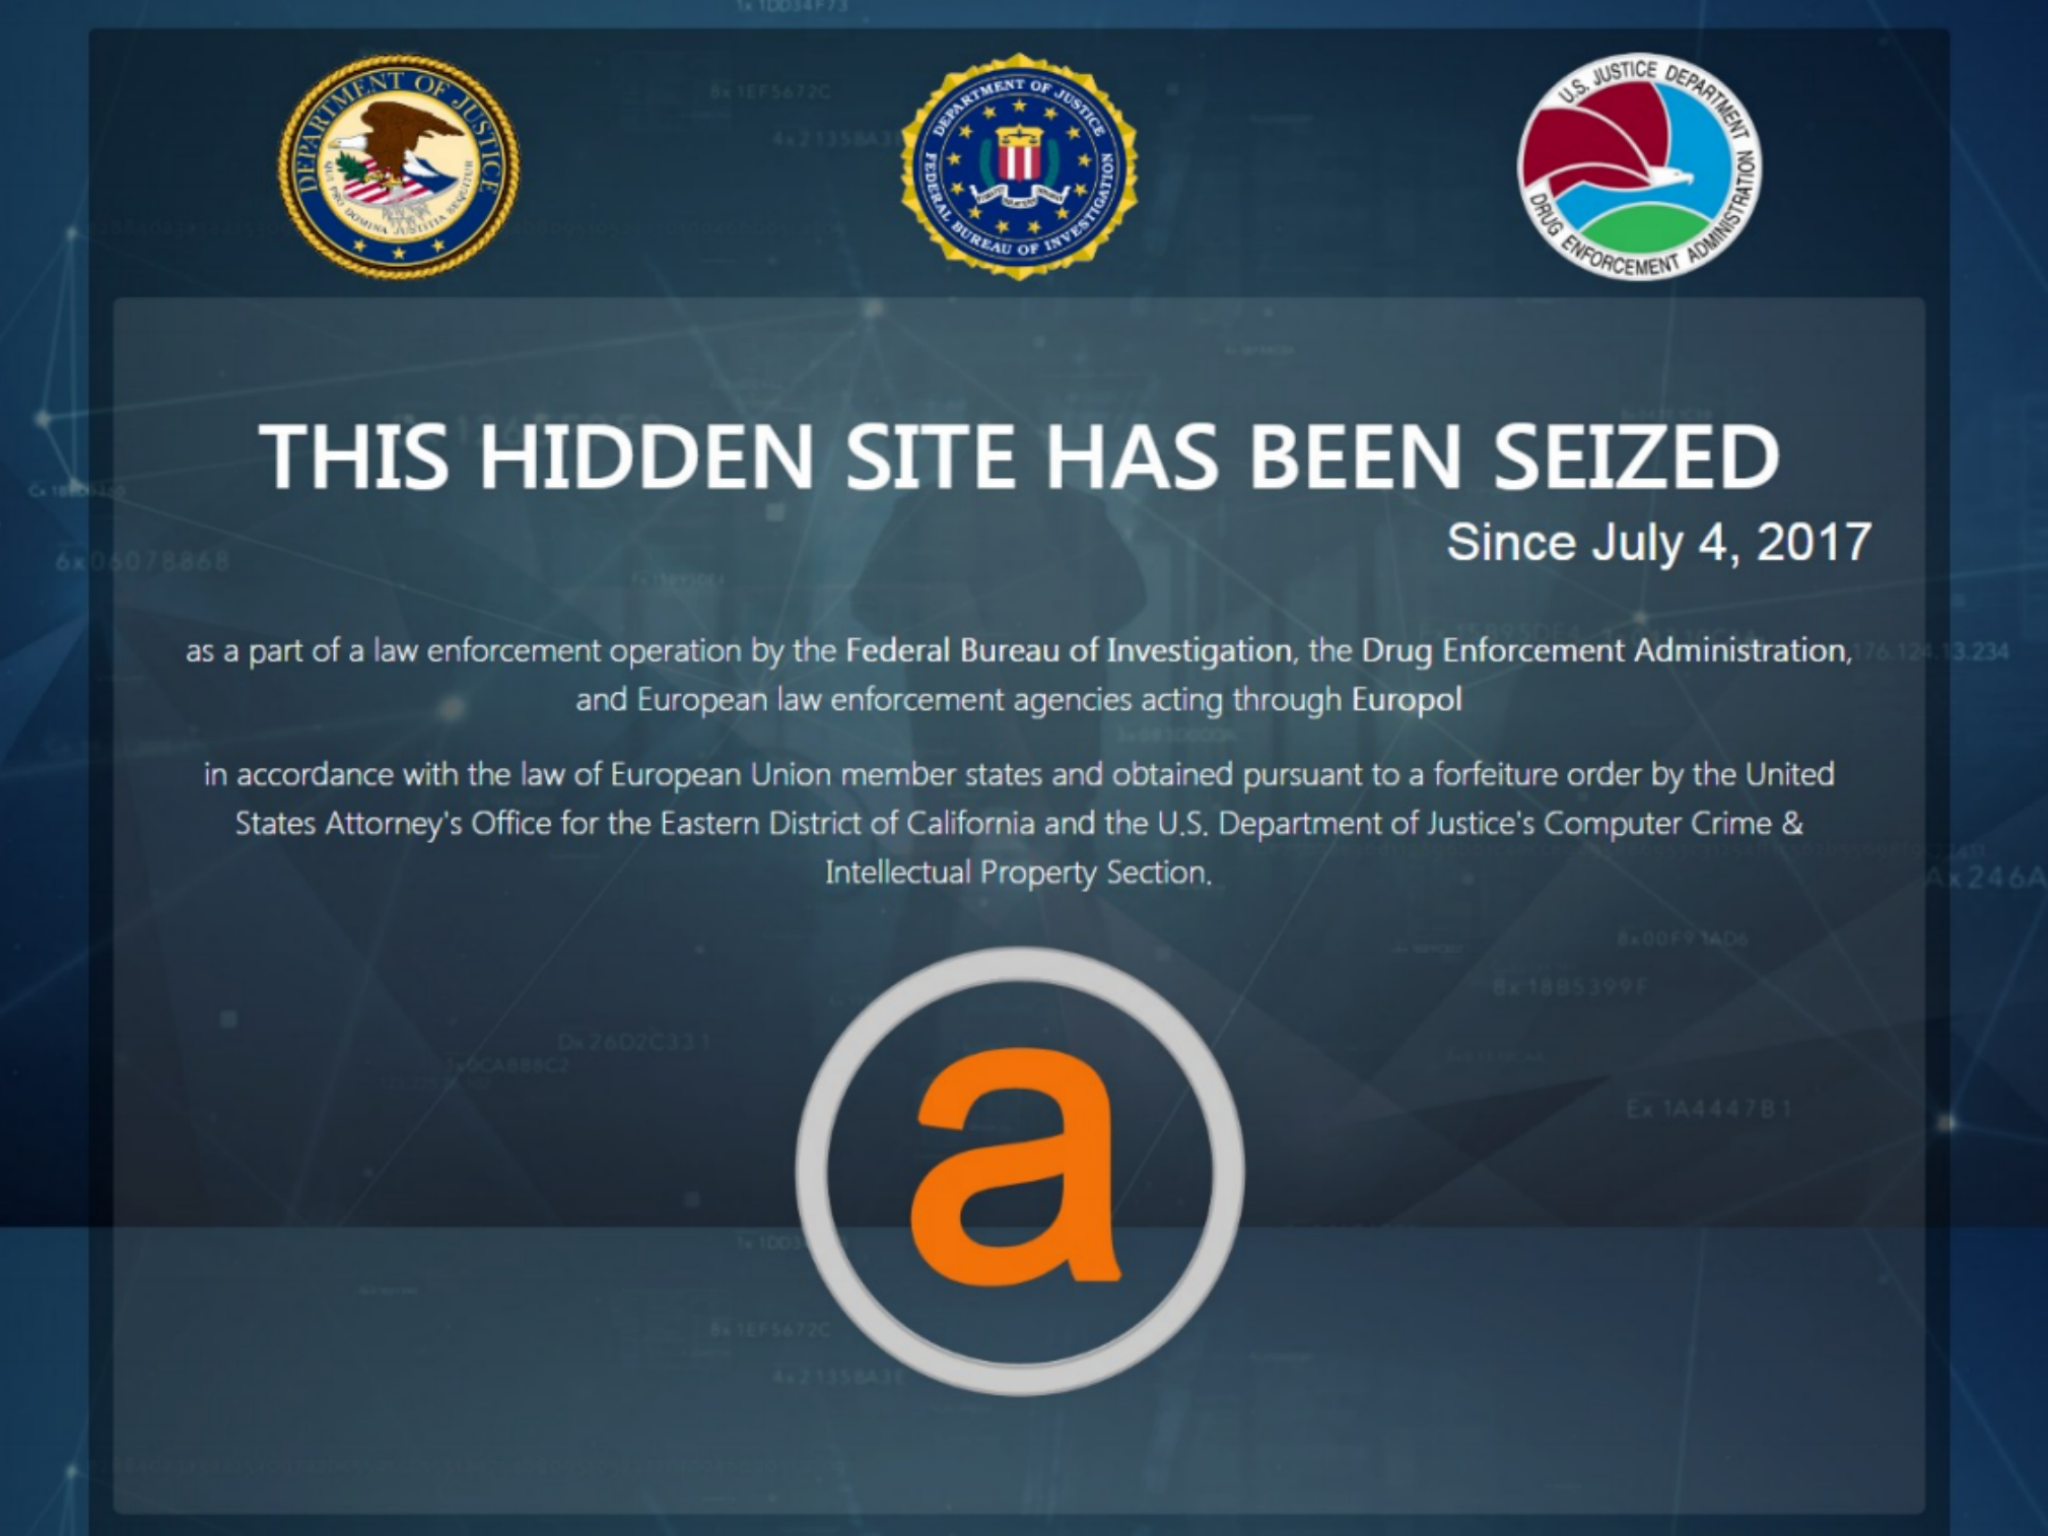 AlphaBay wasn't accessible through regular web browsers like Google Chrome and Firefox